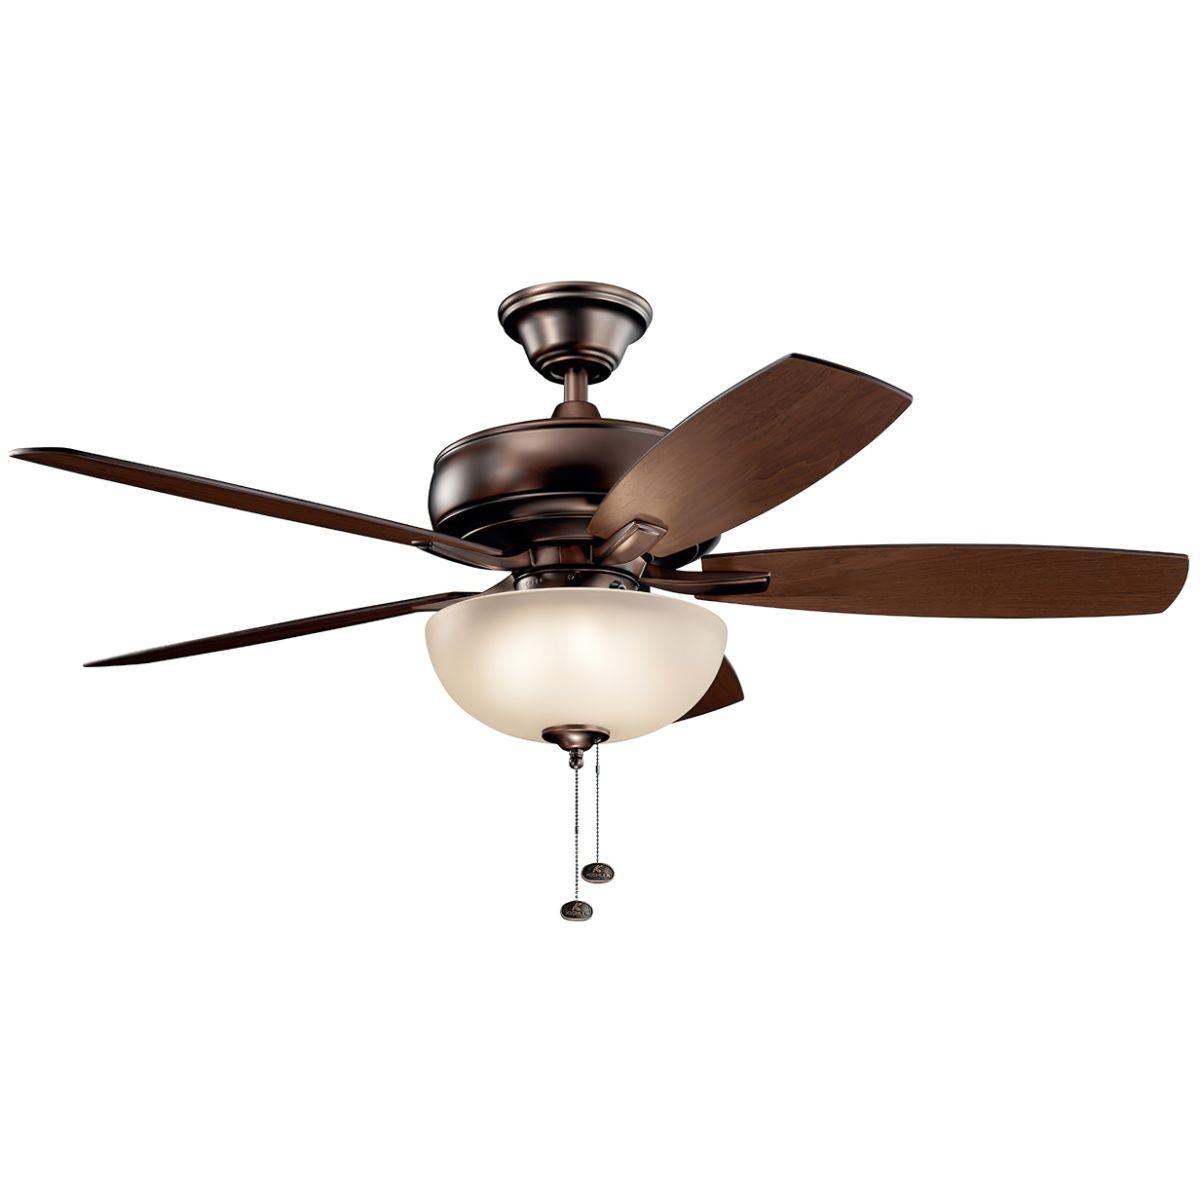 Terra Select 52 Inch Modern Ceiling Fan With Light And Pull Chain